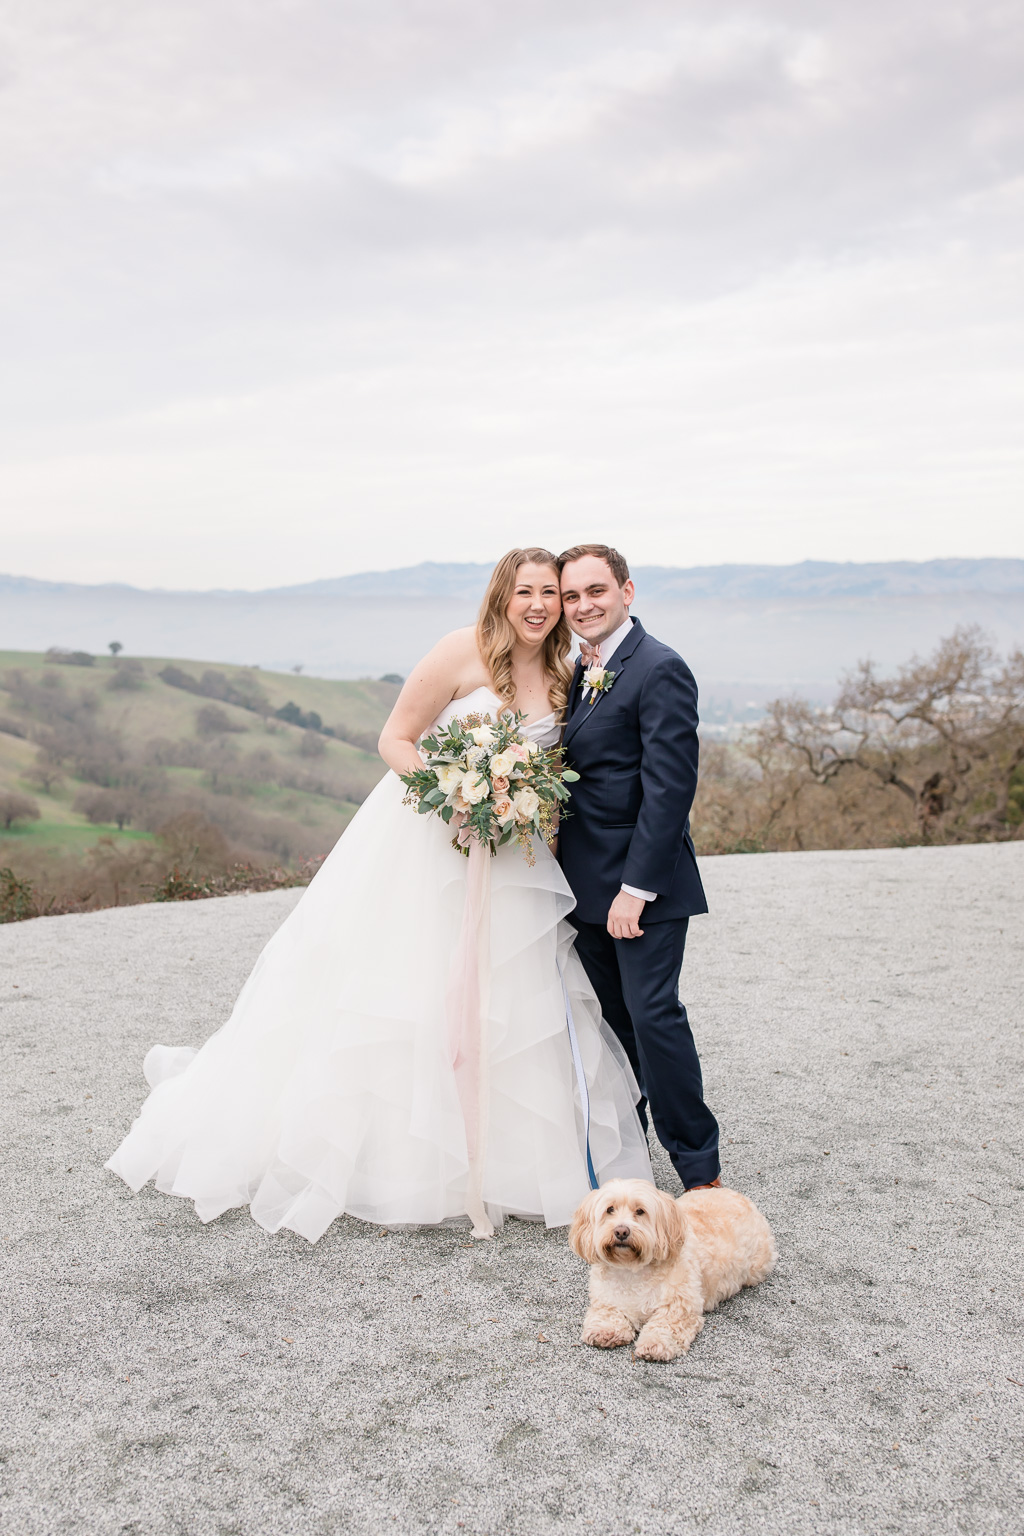 adorable wedding family photo with their beloved dog